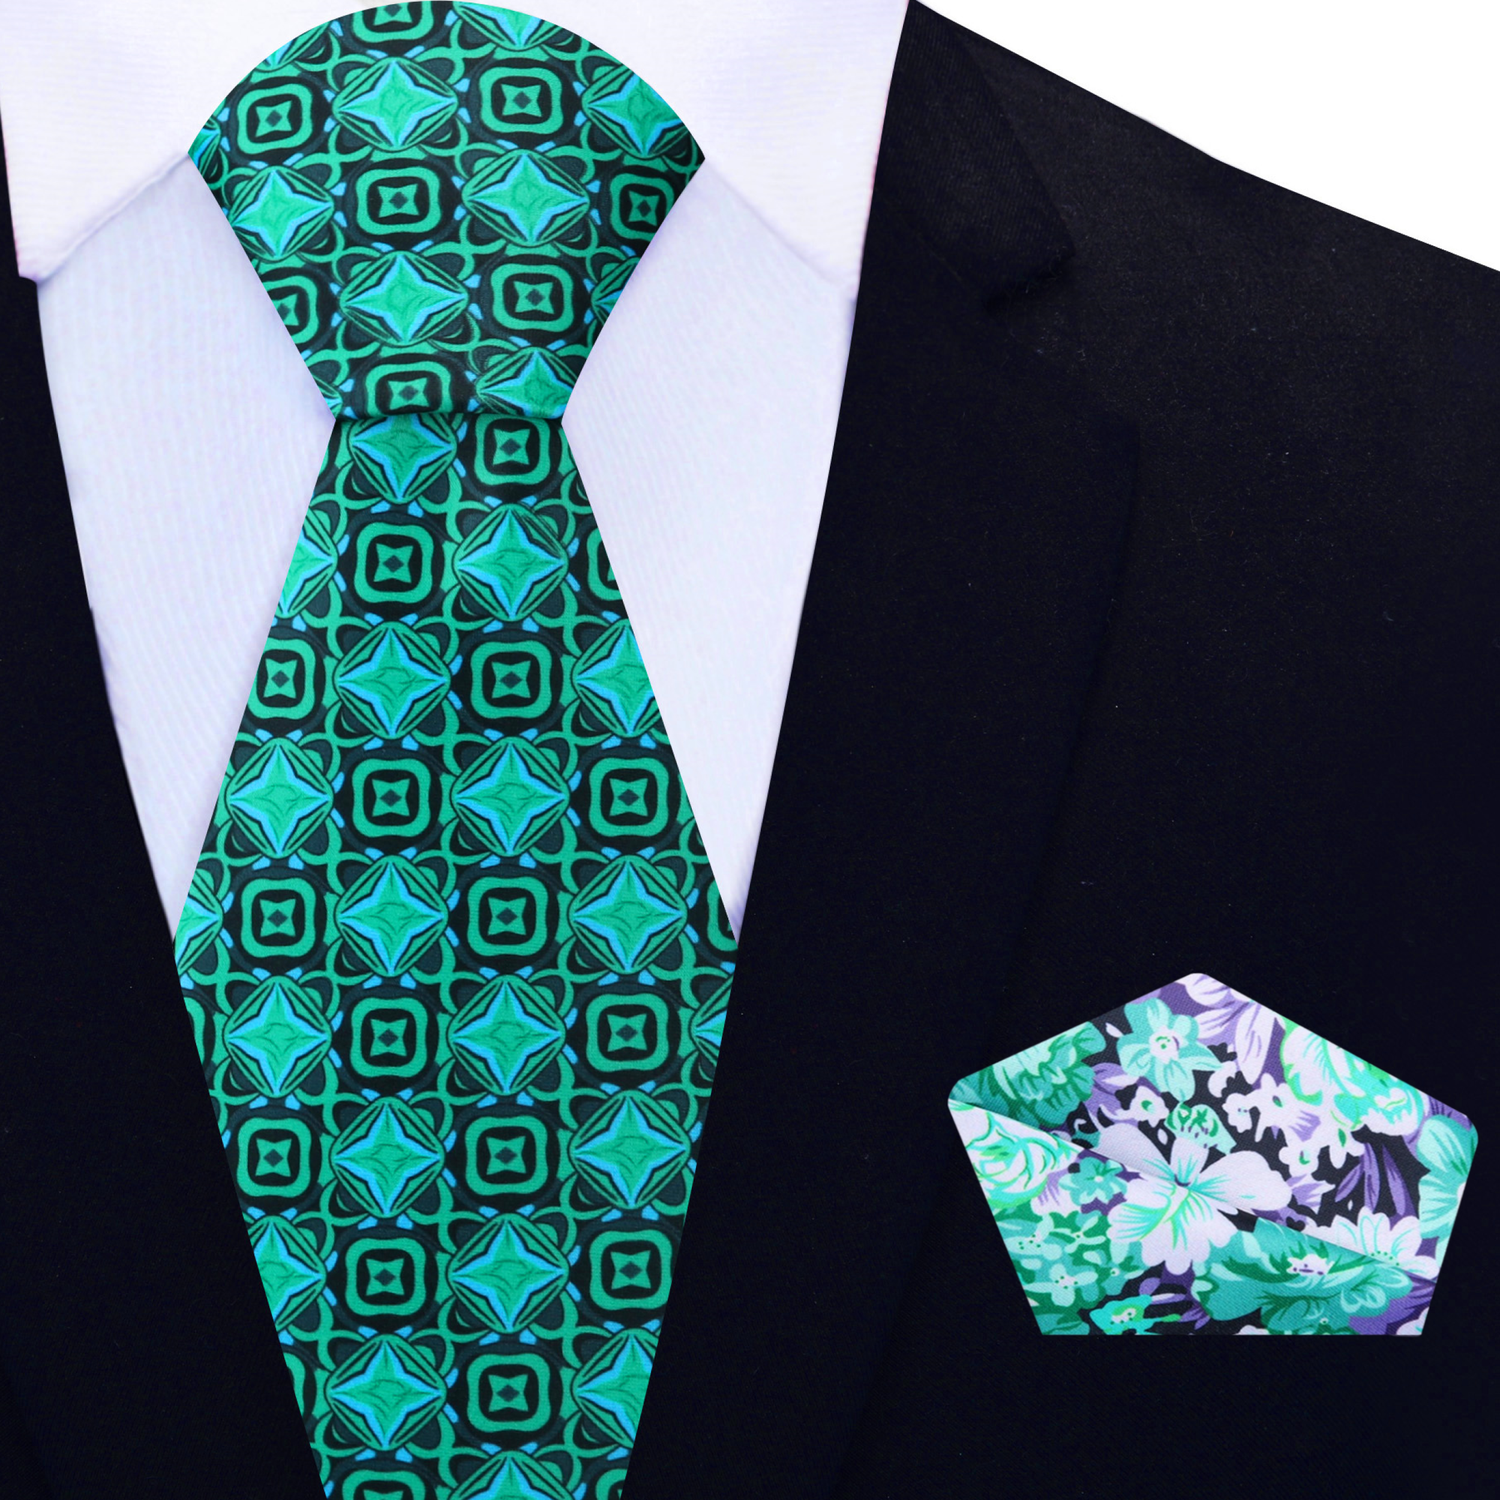 View 2; Green Geometric Tie and Green, White, Purple Floral Square